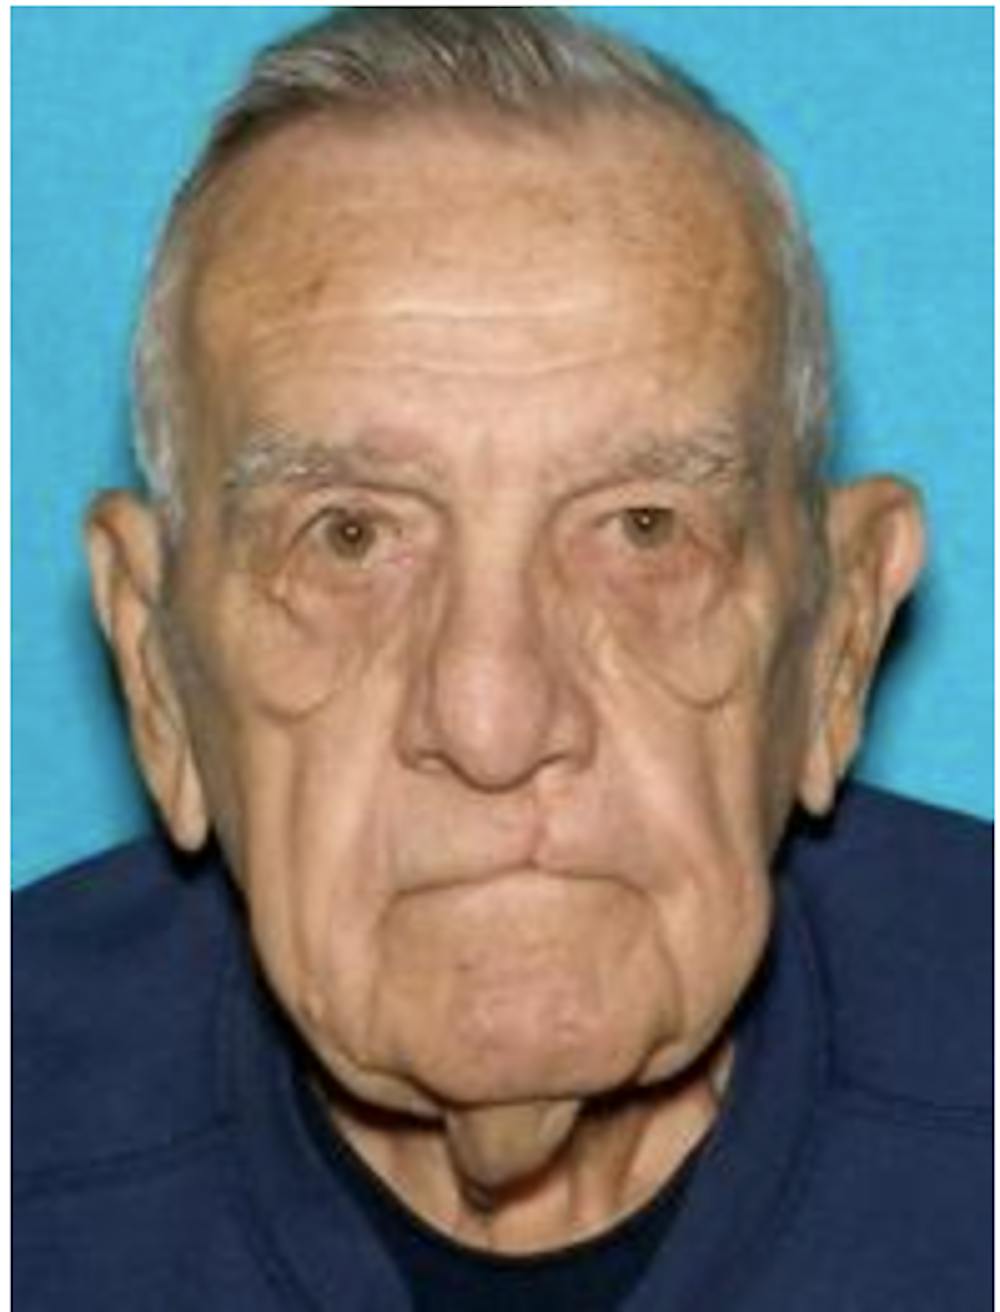 <p><strong>Indiana Silver Alert, Photo Provided</strong></p>